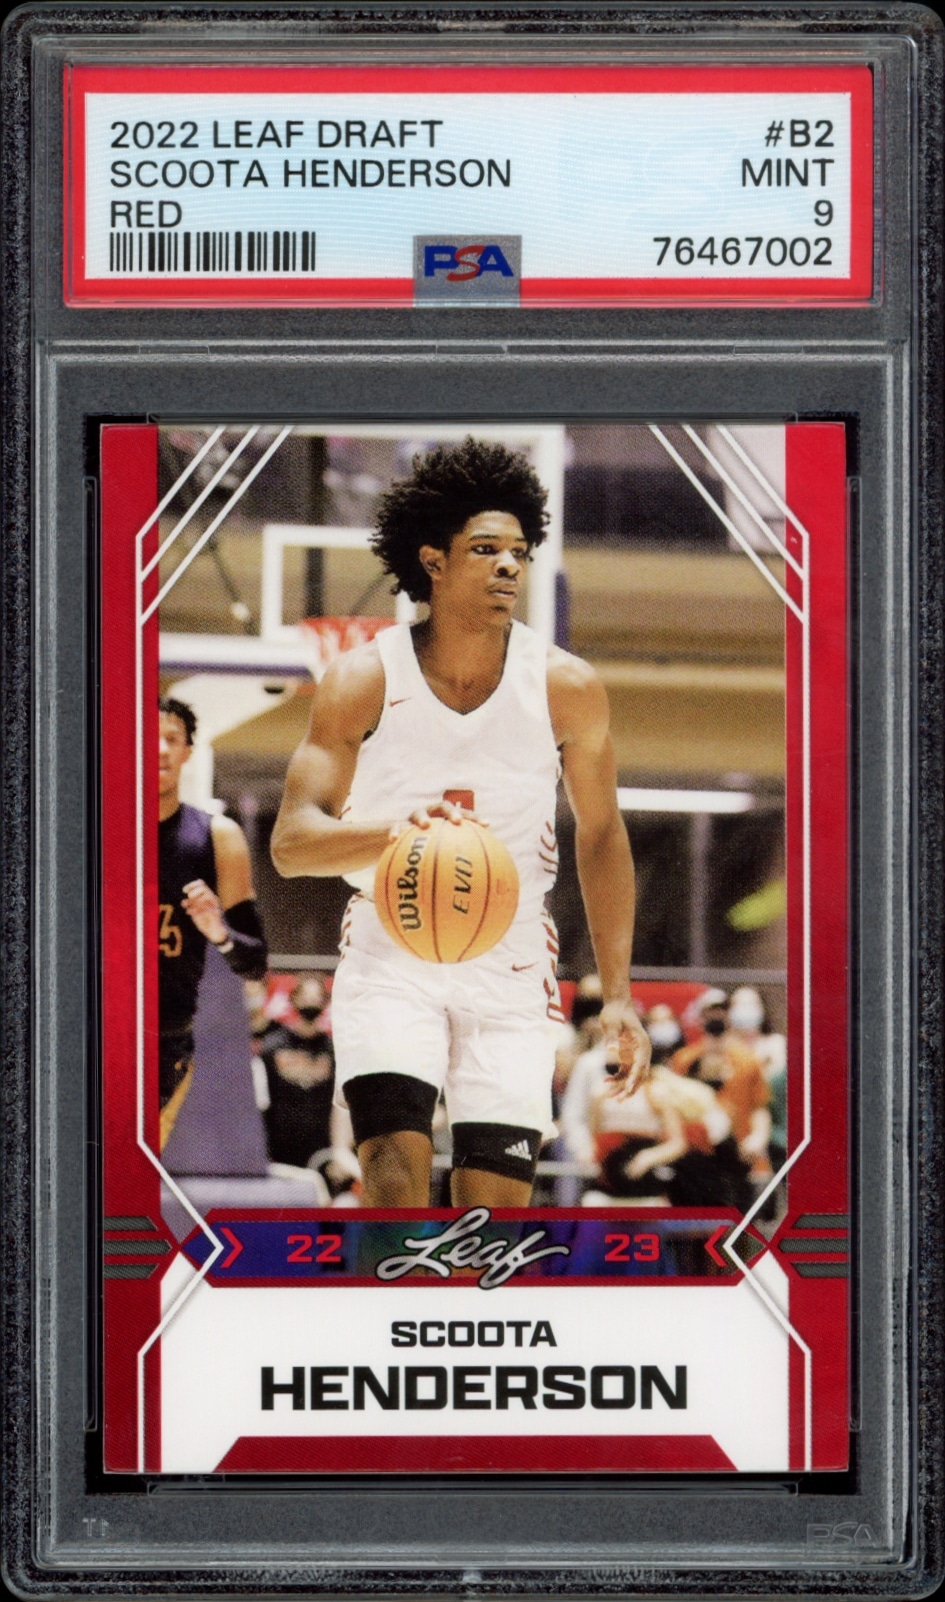 Scoota Hendersons 2022 Leaf Draft Red #B-2 basketball card, graded MINT 9 by PSA.